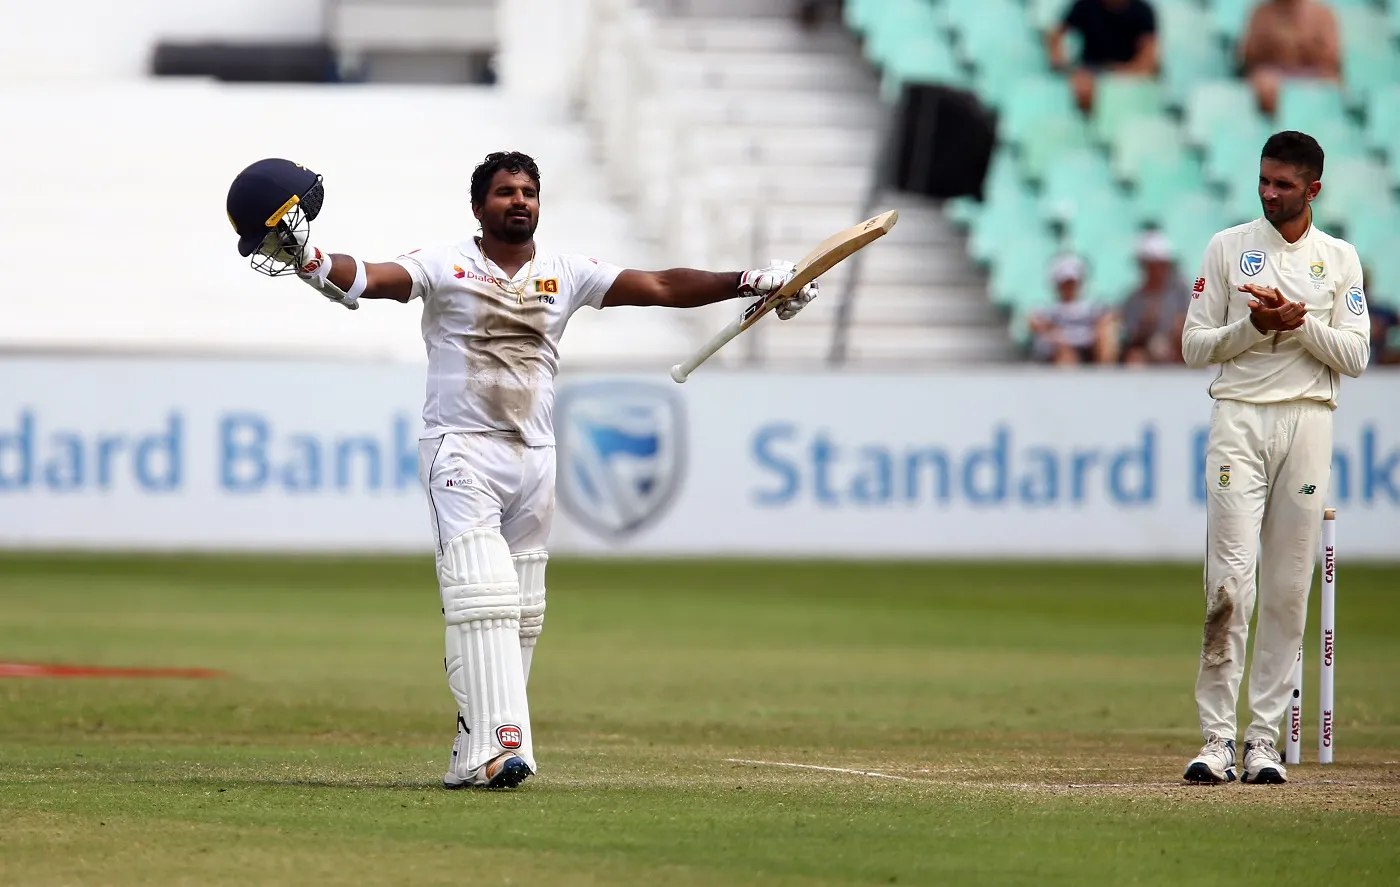 Kusla Perera's 153 is one of the greatest innings in Test Cricket | SportzPoint